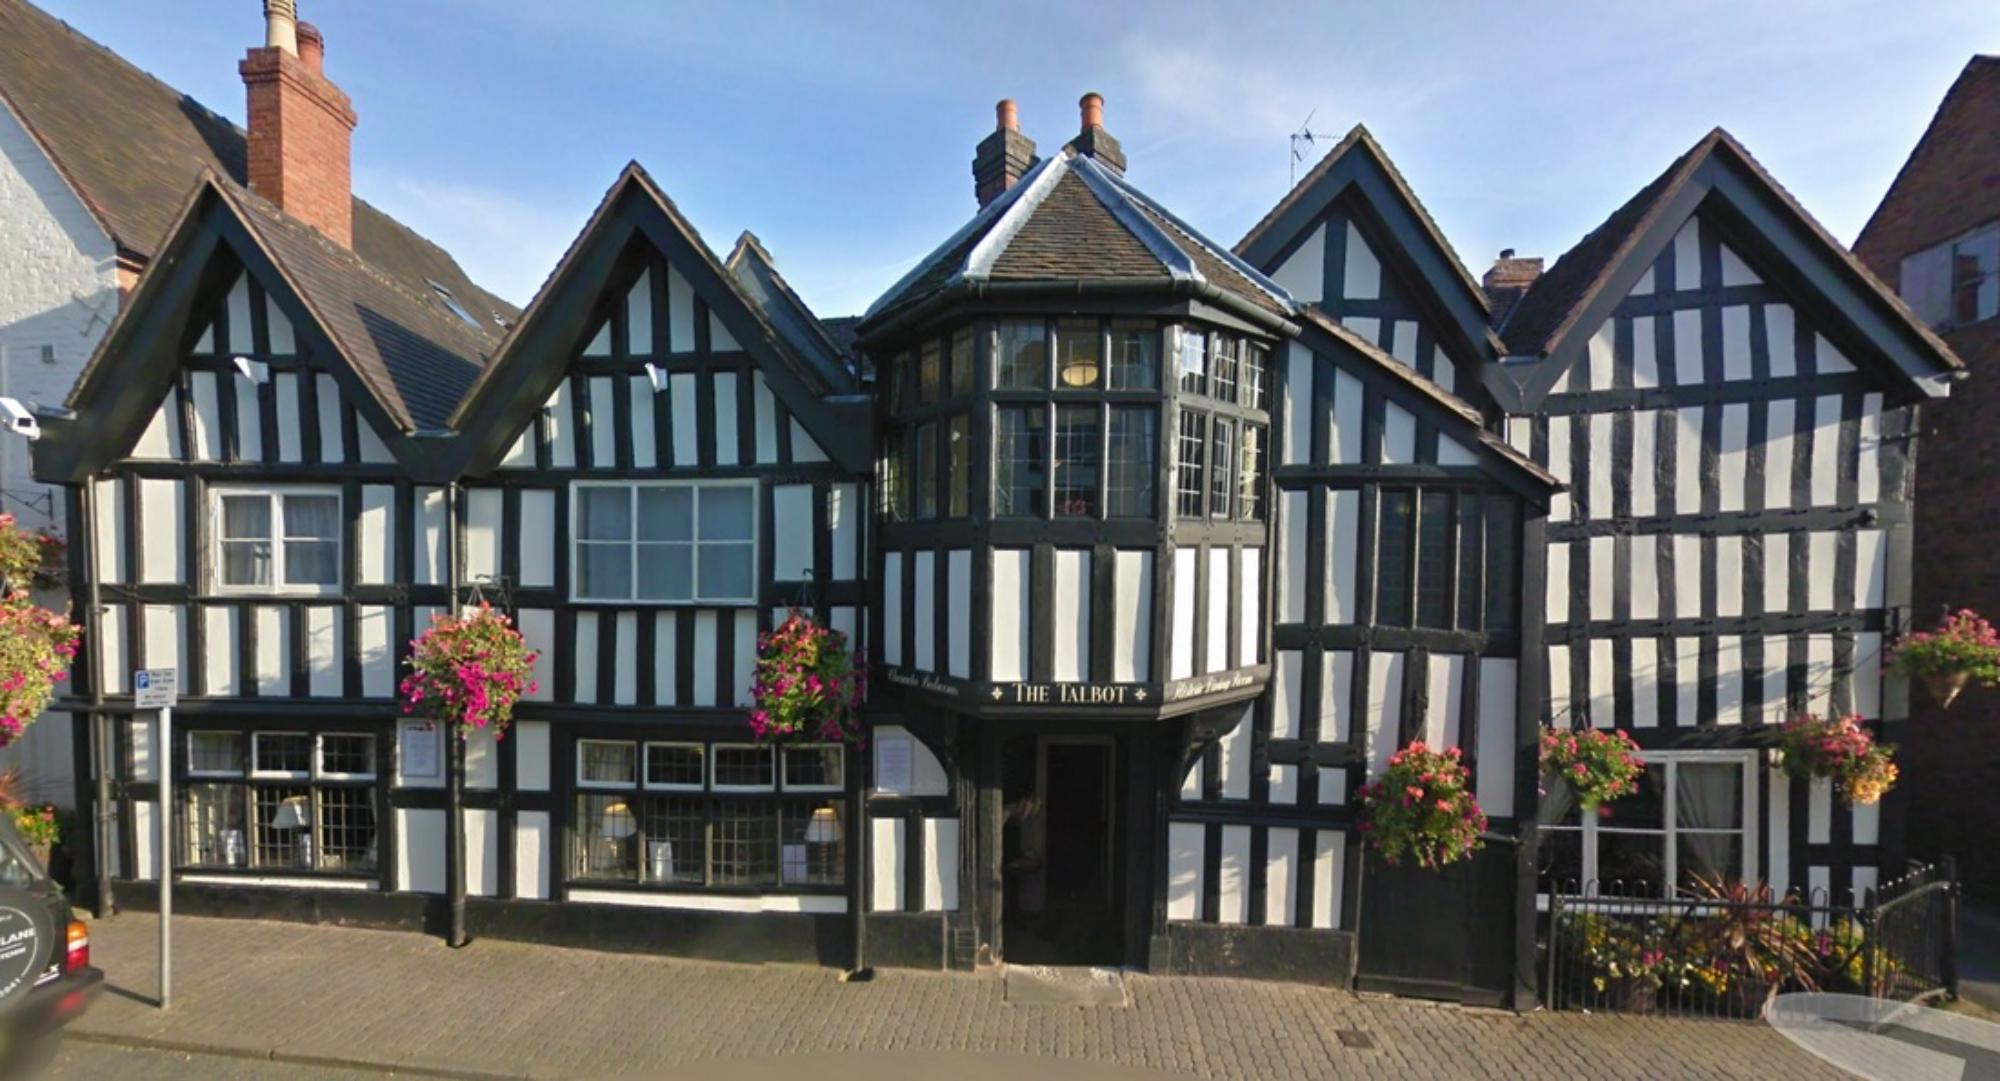 Hotels in Ledbury holidays at Cool Places